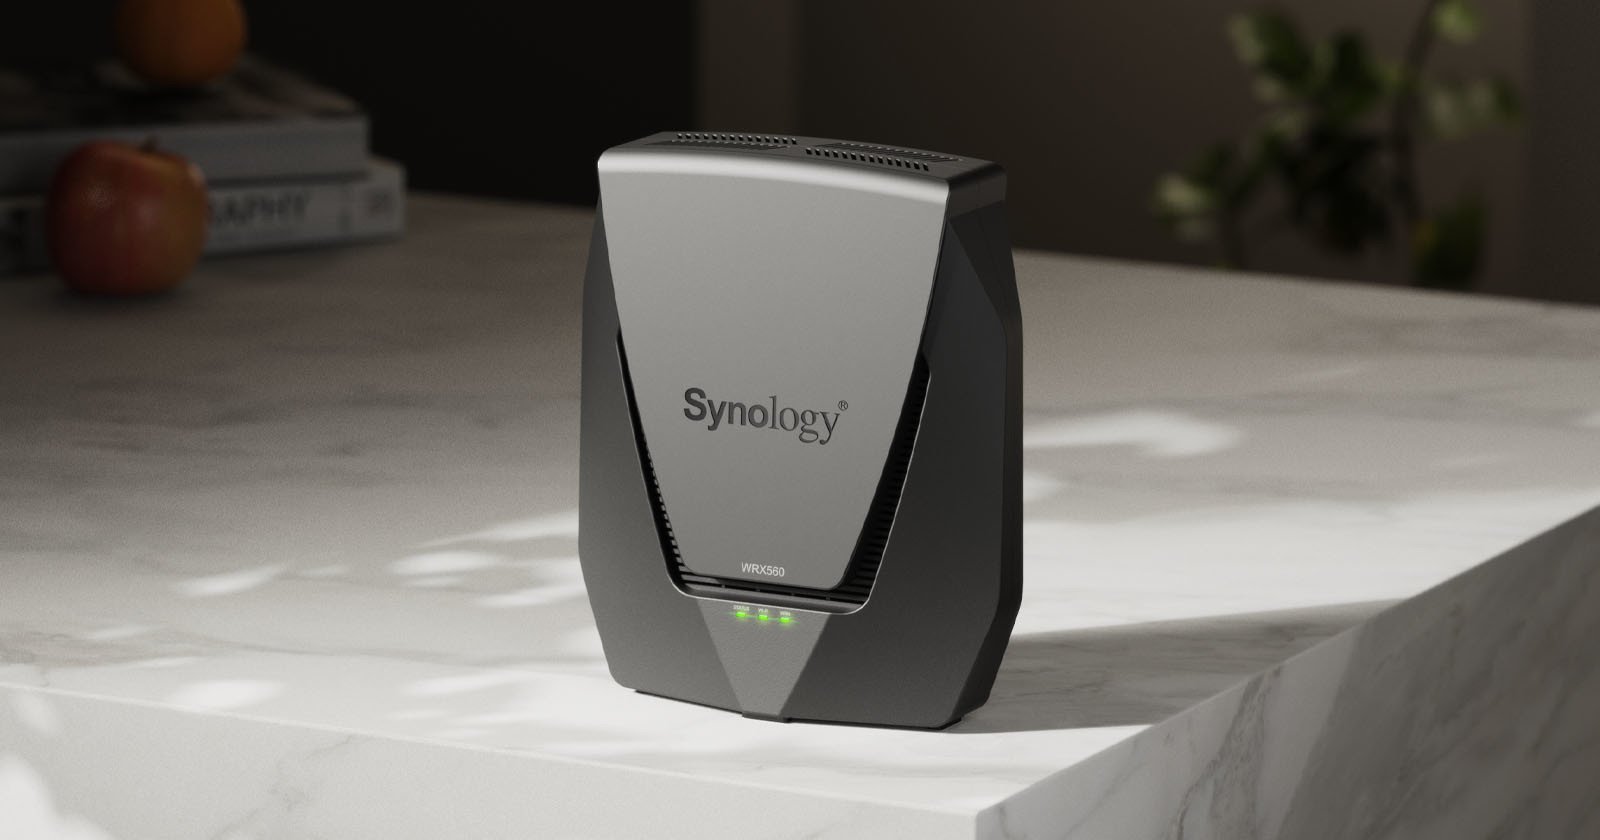  synology wifi mesh router designed 